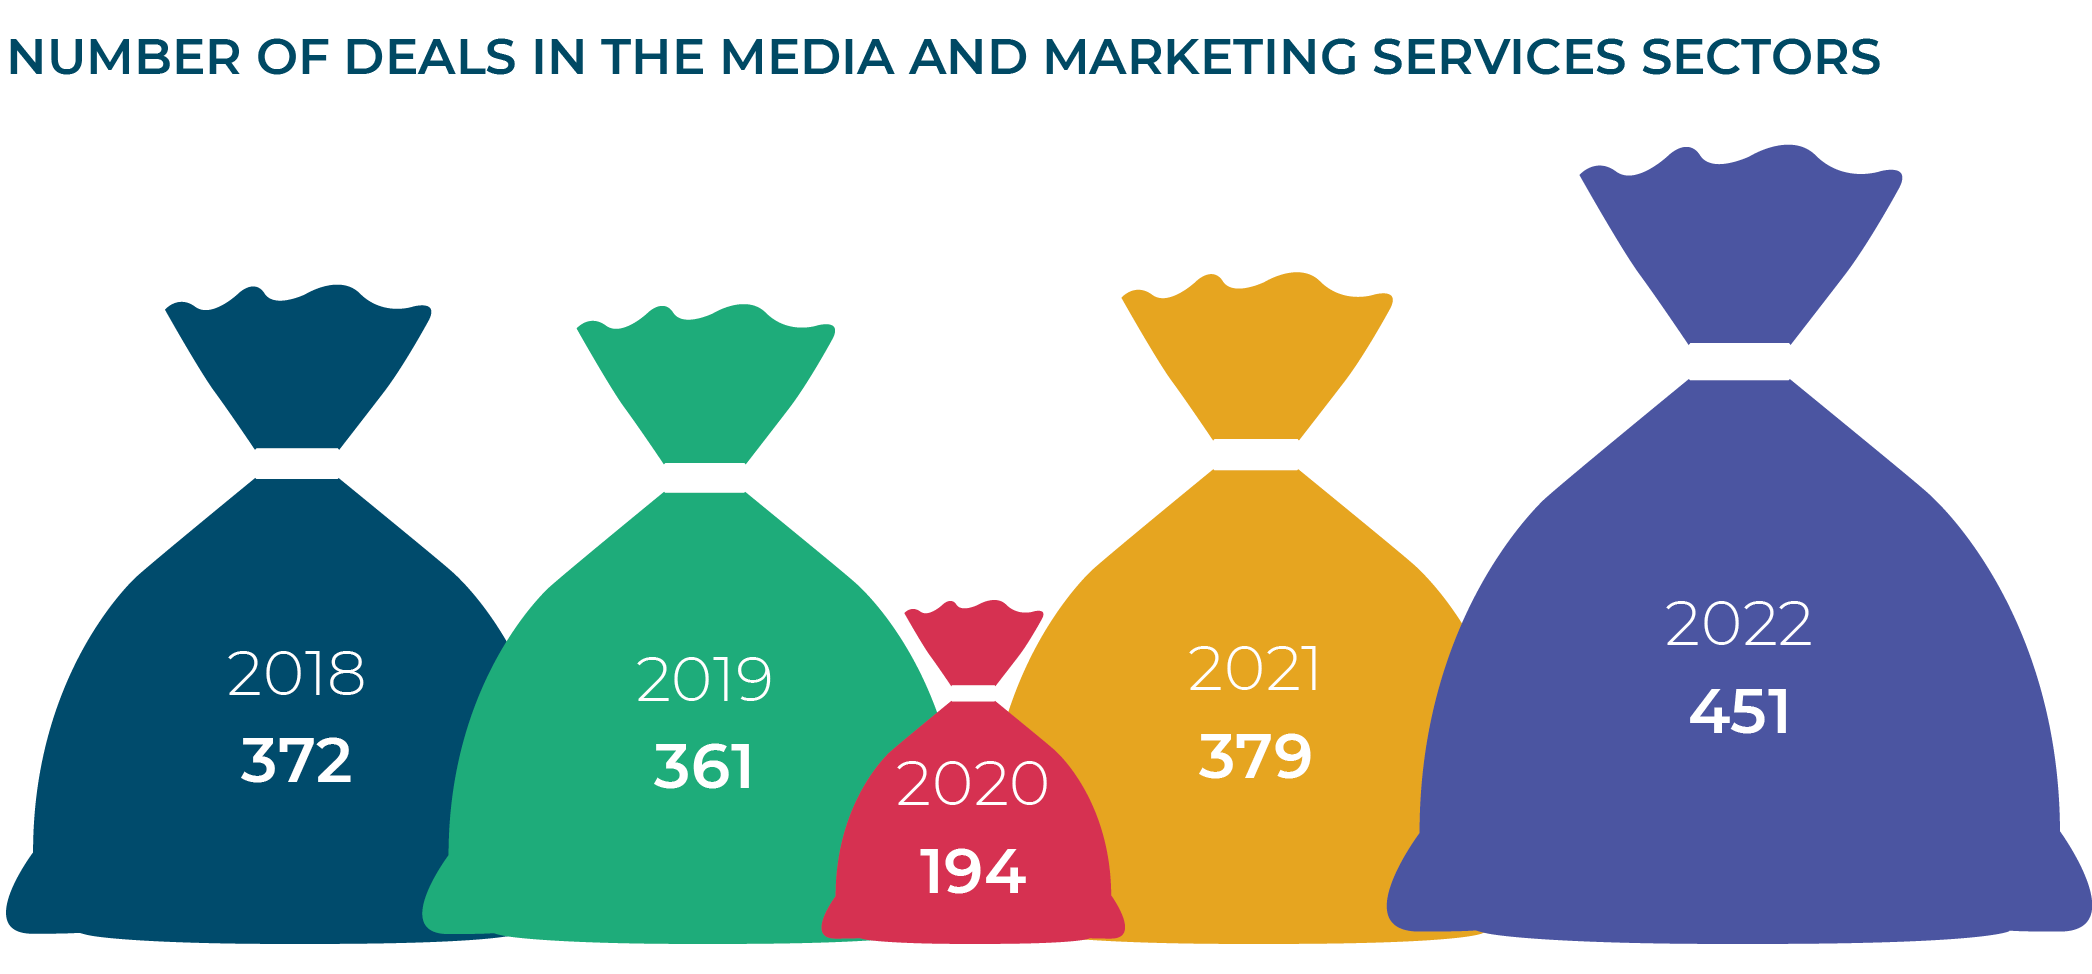 NUMBER OF DEALS IN THE MEDIA AND MARKETING SERVICES SECTORS